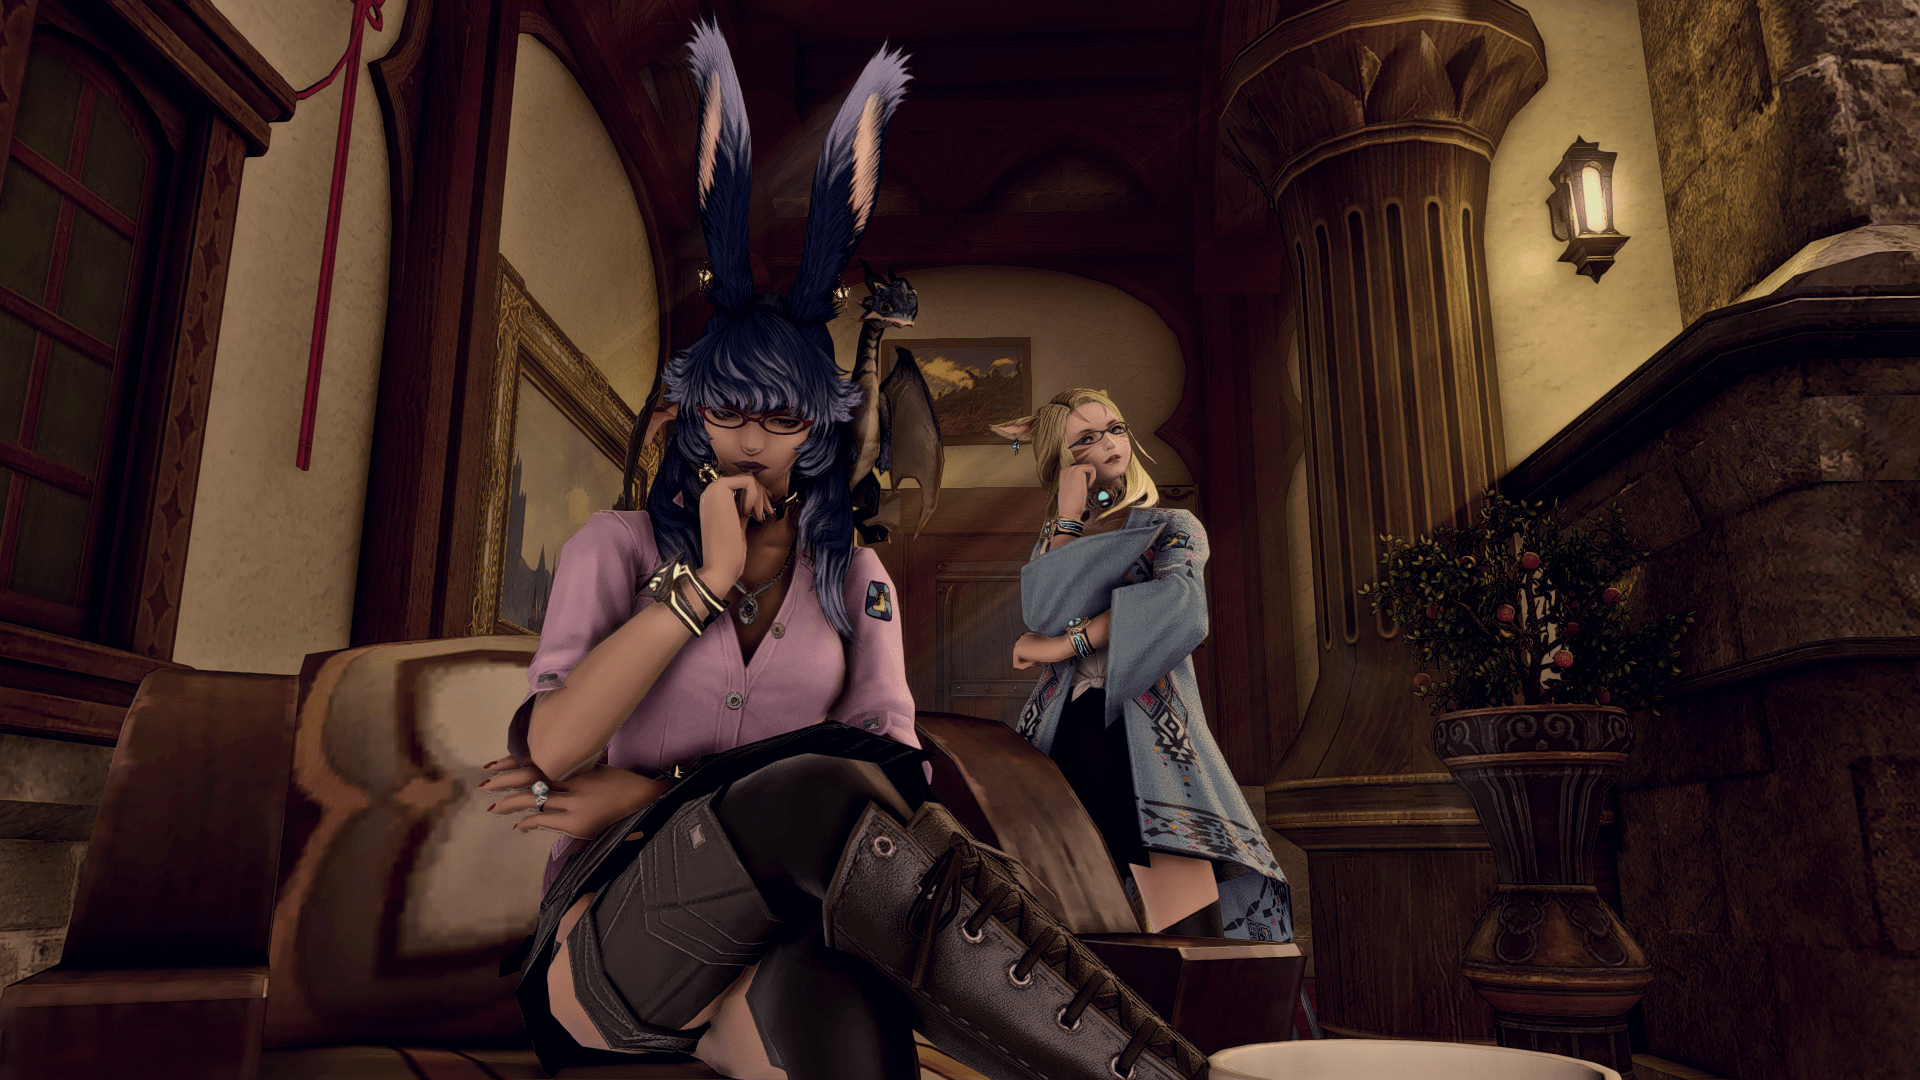 Aiki and I deep in thought inside EOCA HQ in Final Fantasy XIV.